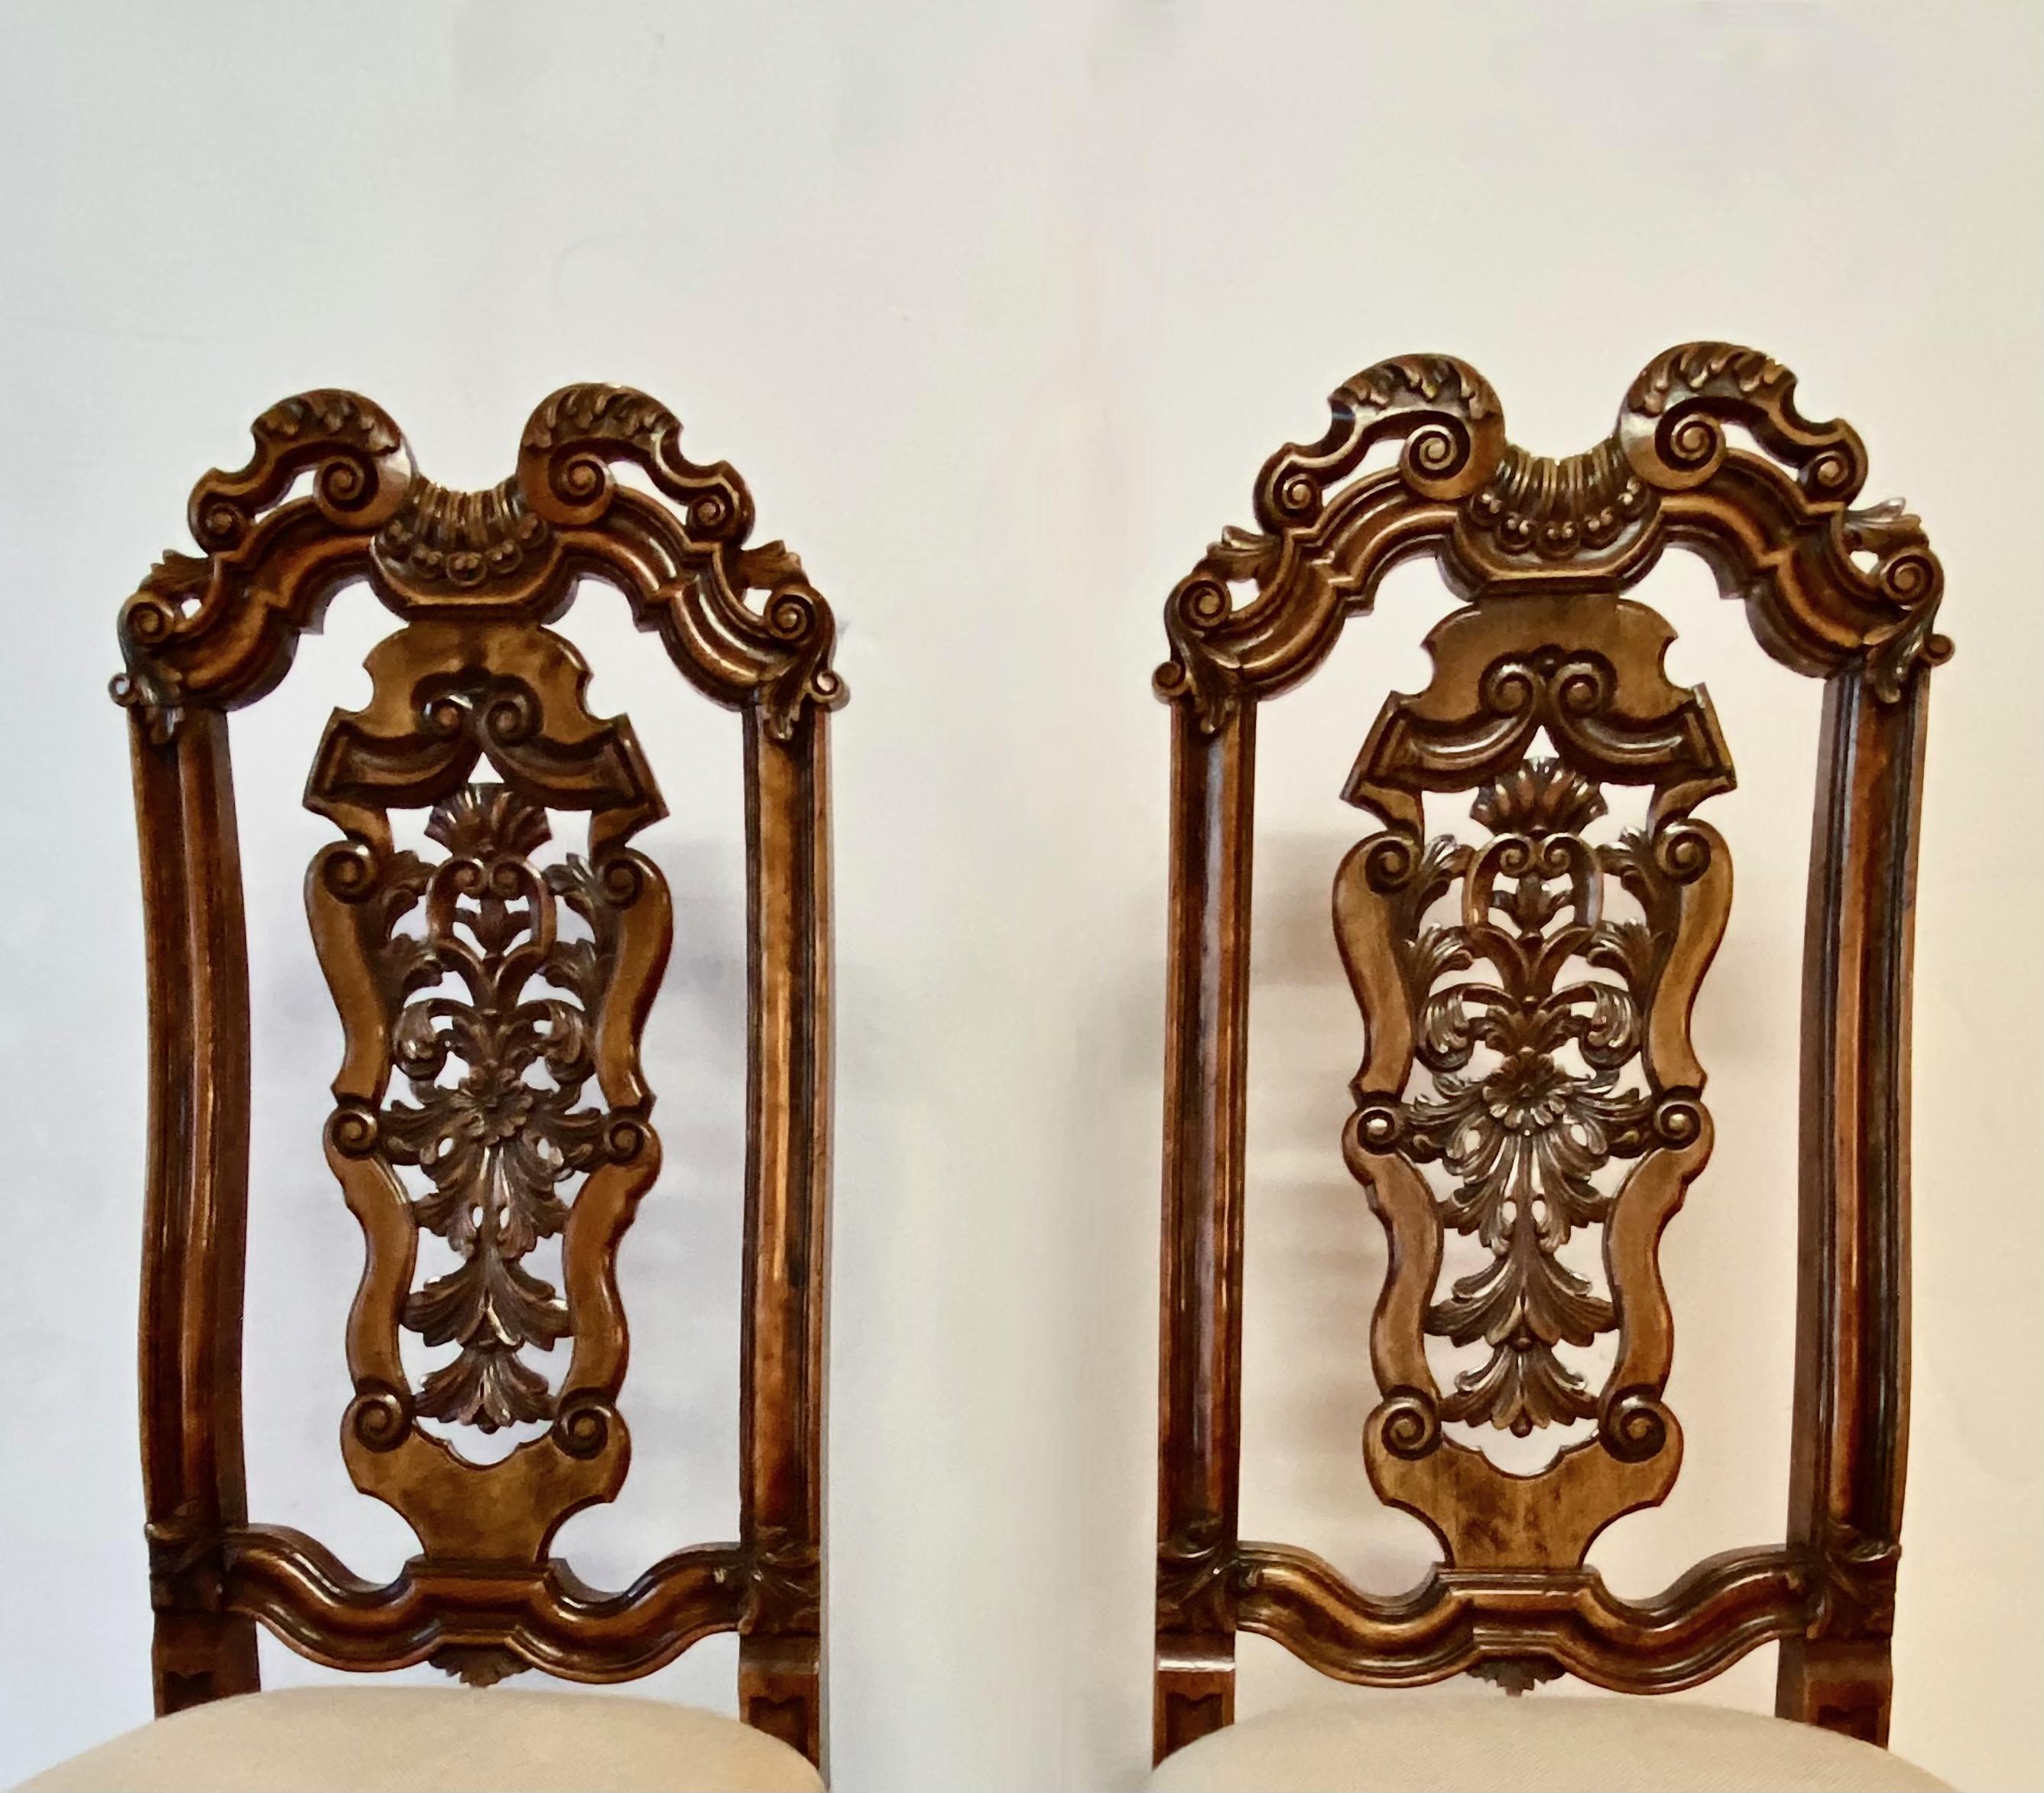 These beautifully carved high back William & Mary side chairs were created at the end of the sixteenth century c. 1690. The intricate carving of the legs, stretchers snd backs are indications of high quality. The 18th century hand forged irons that